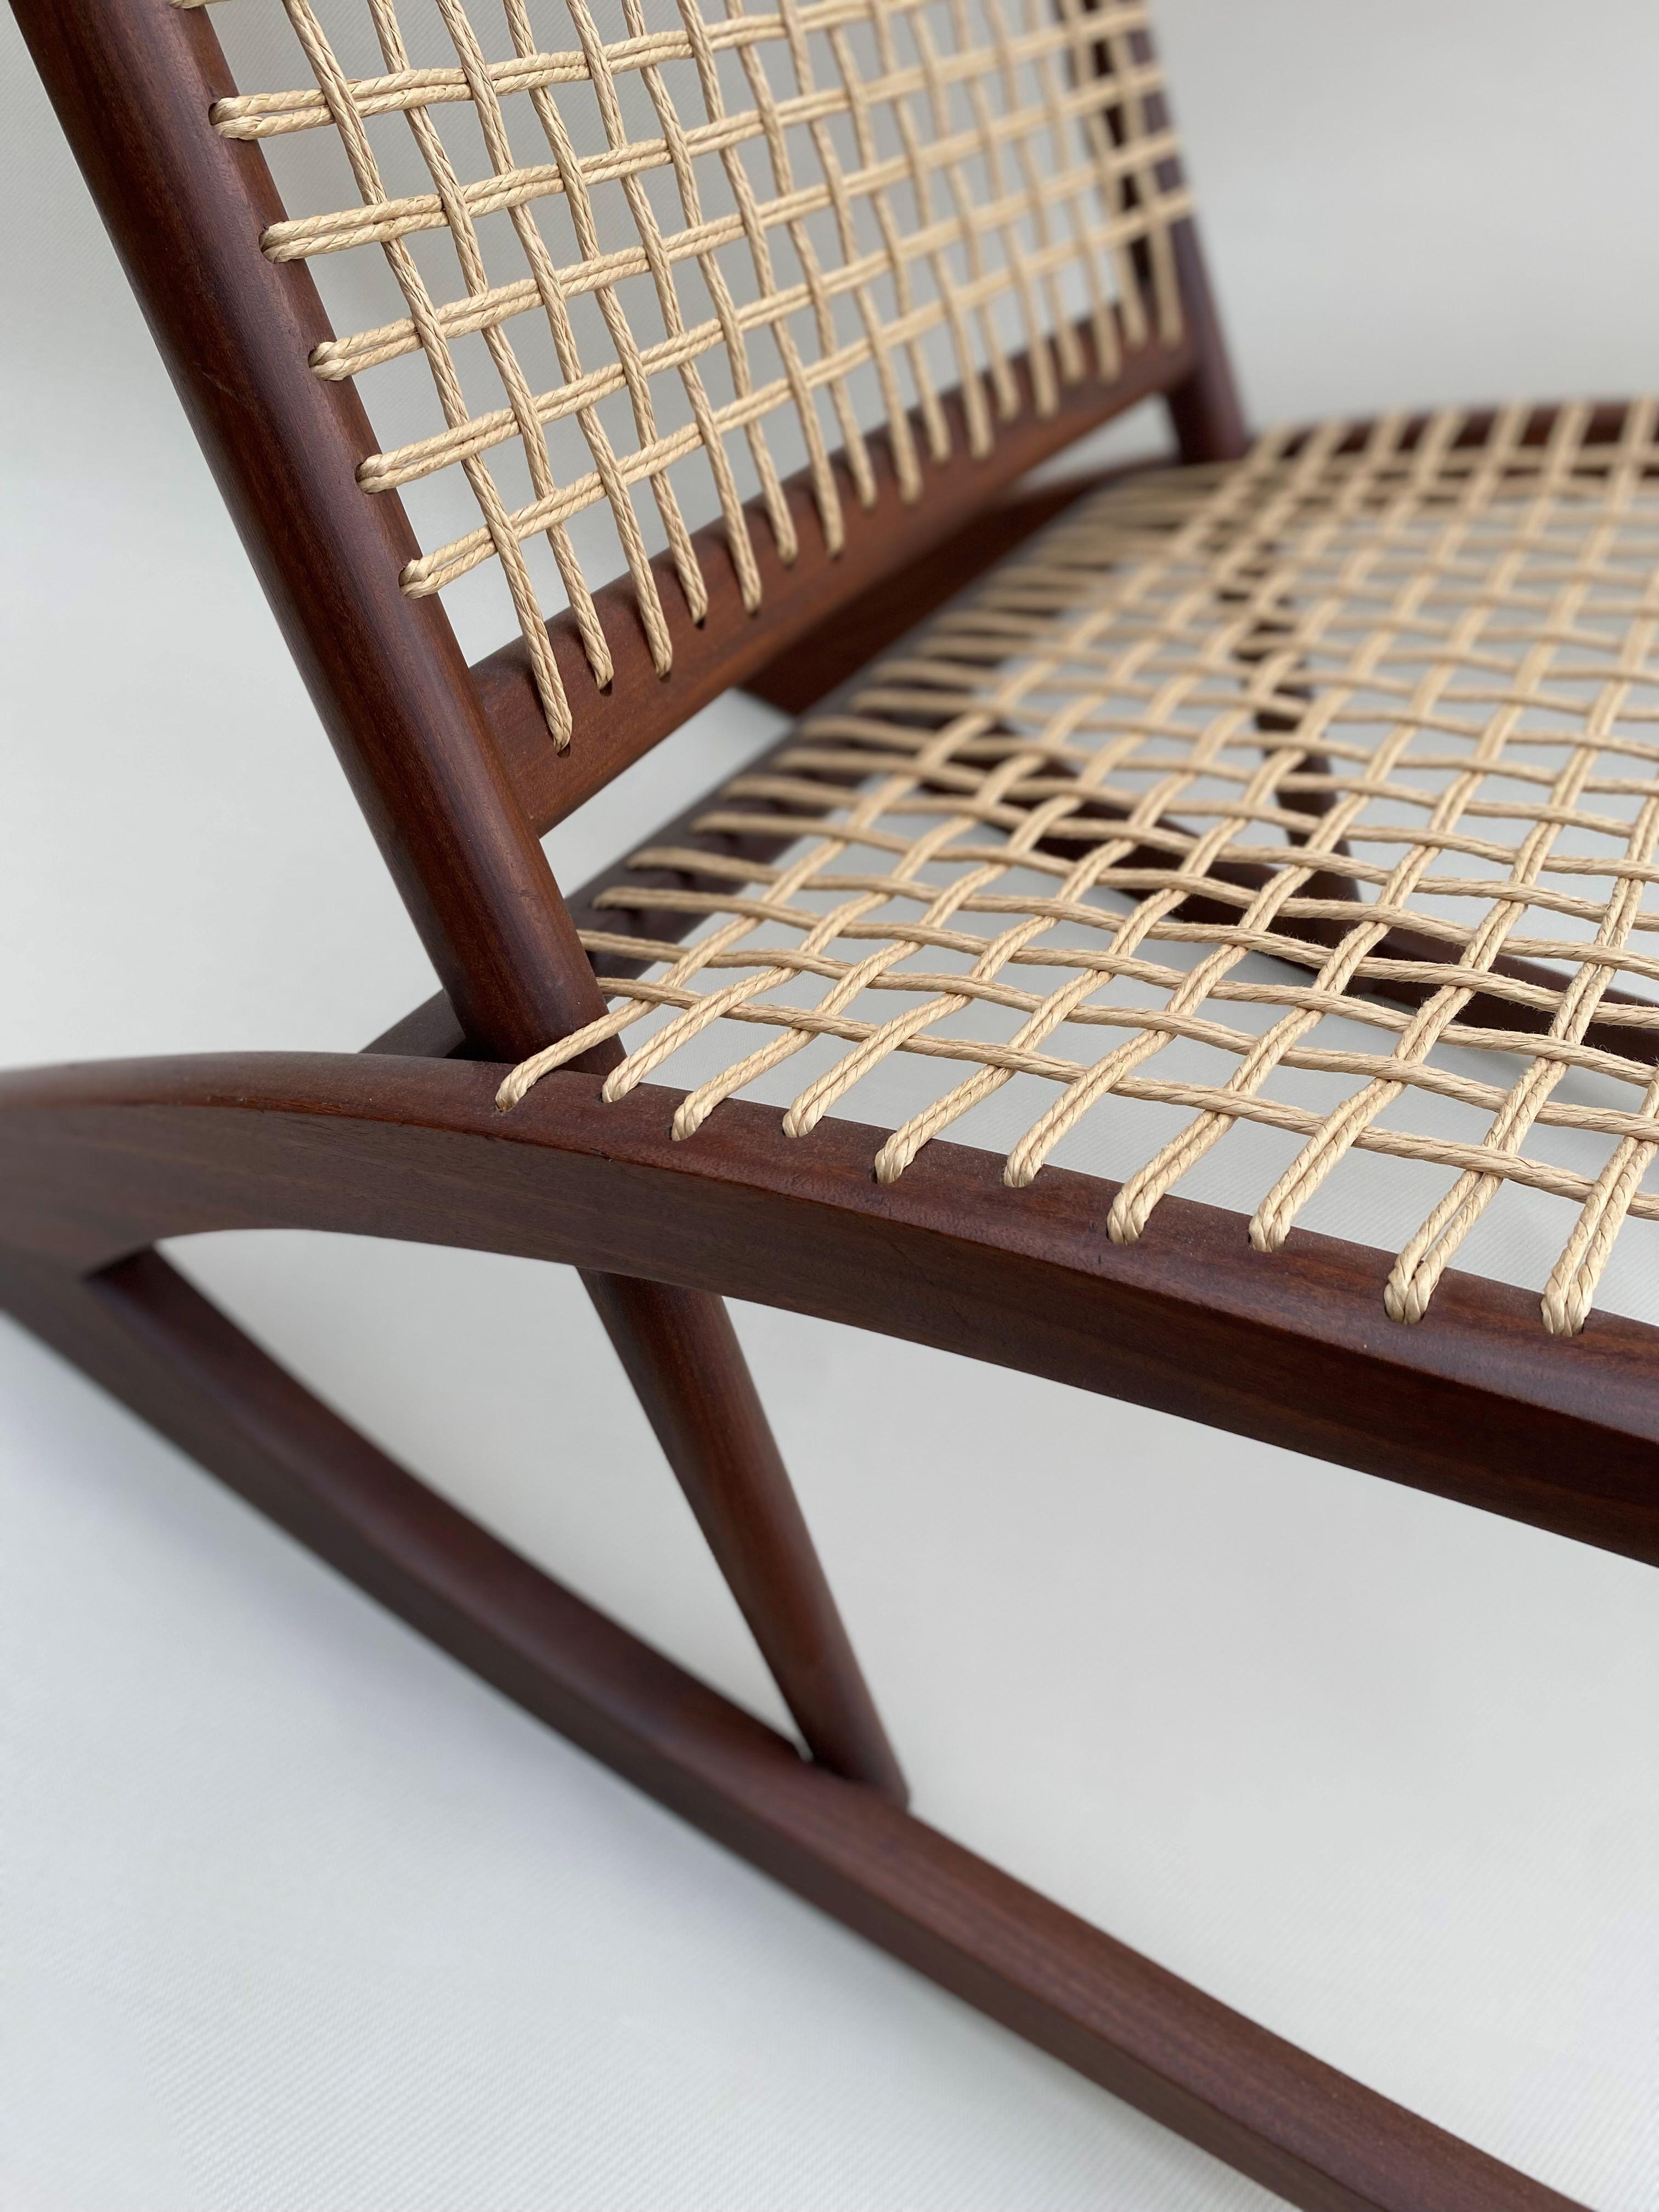 Hand-Woven Rare Midcentury Teak Rocking Chair by Frederik Kayser Model 599 Norway, 1950s For Sale